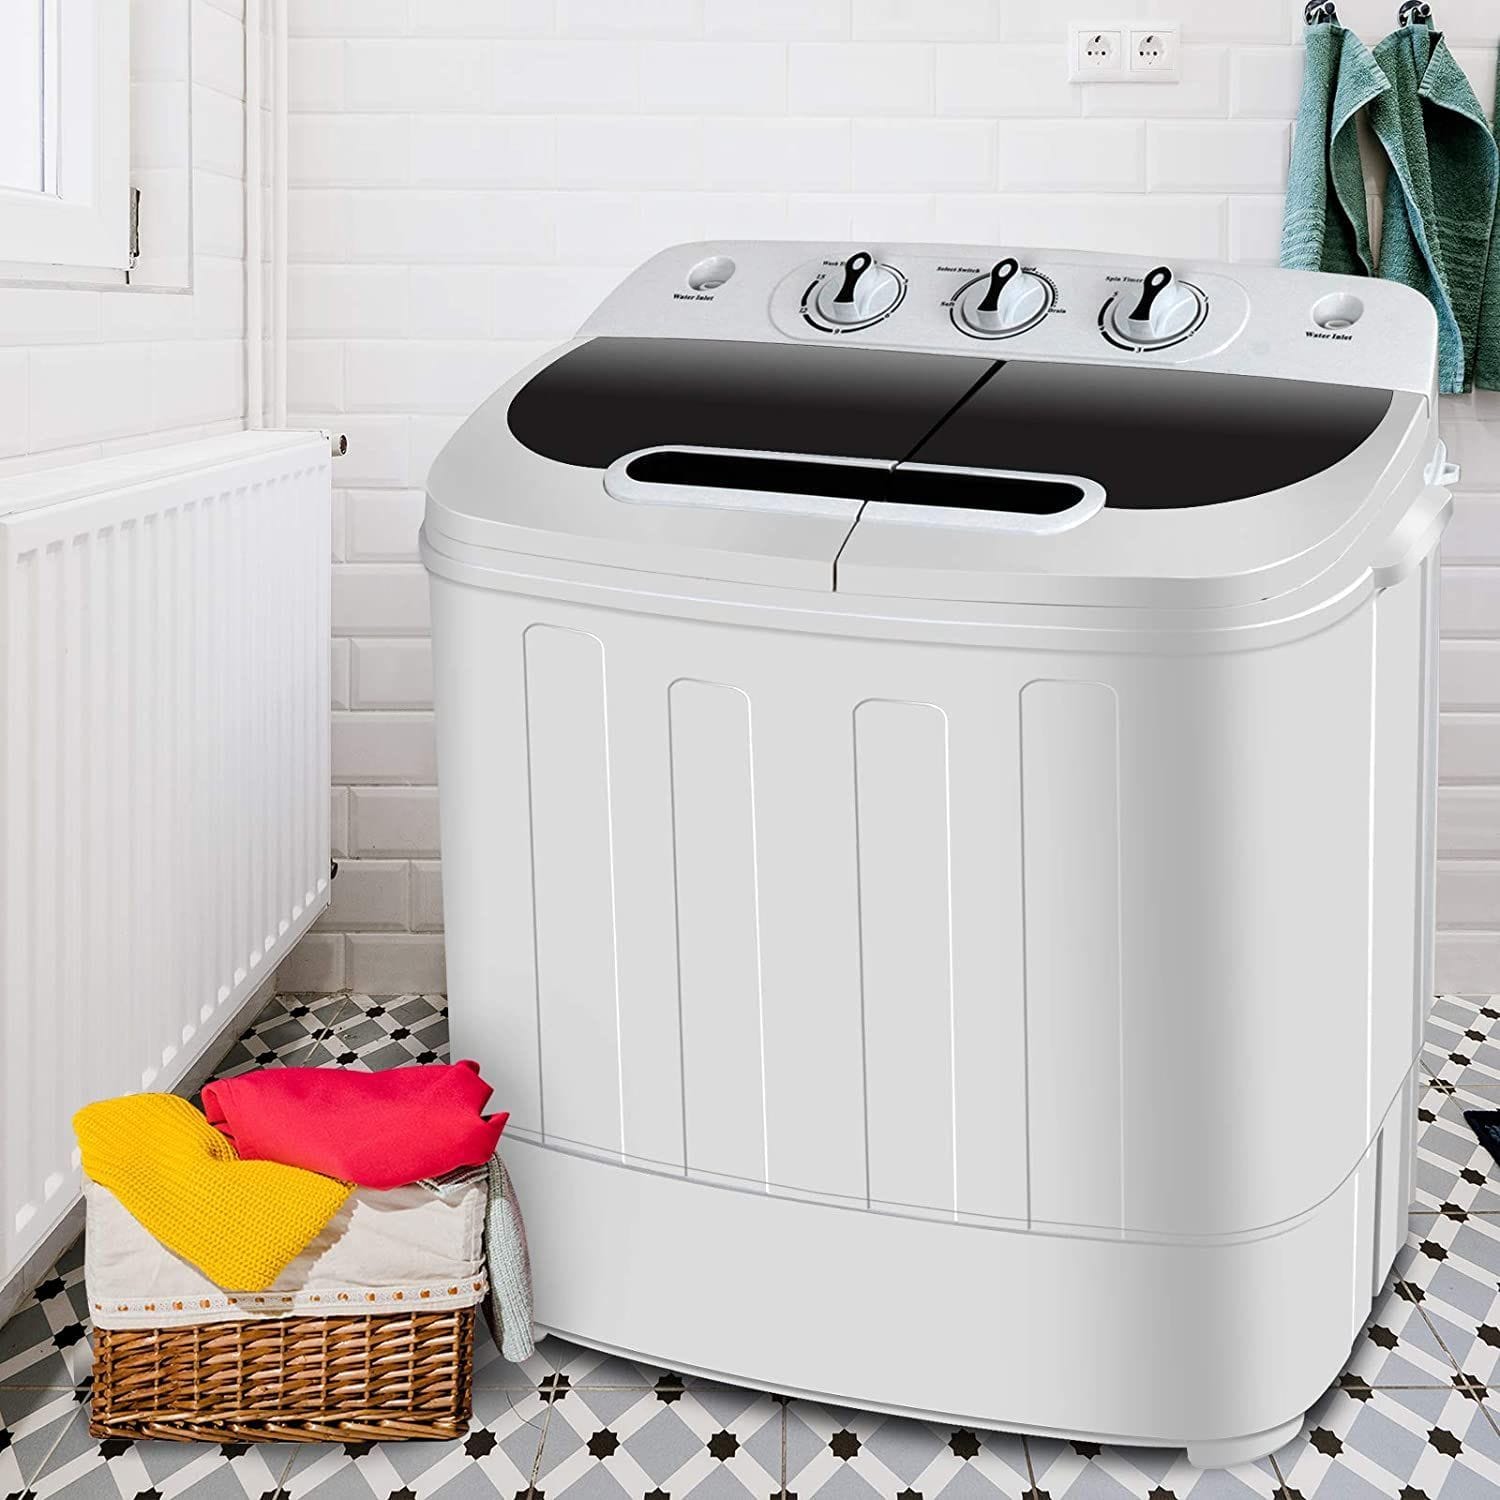 Amazon's affordable Super Deal Portable Washer-Dryer set up in a larger laundry space. 